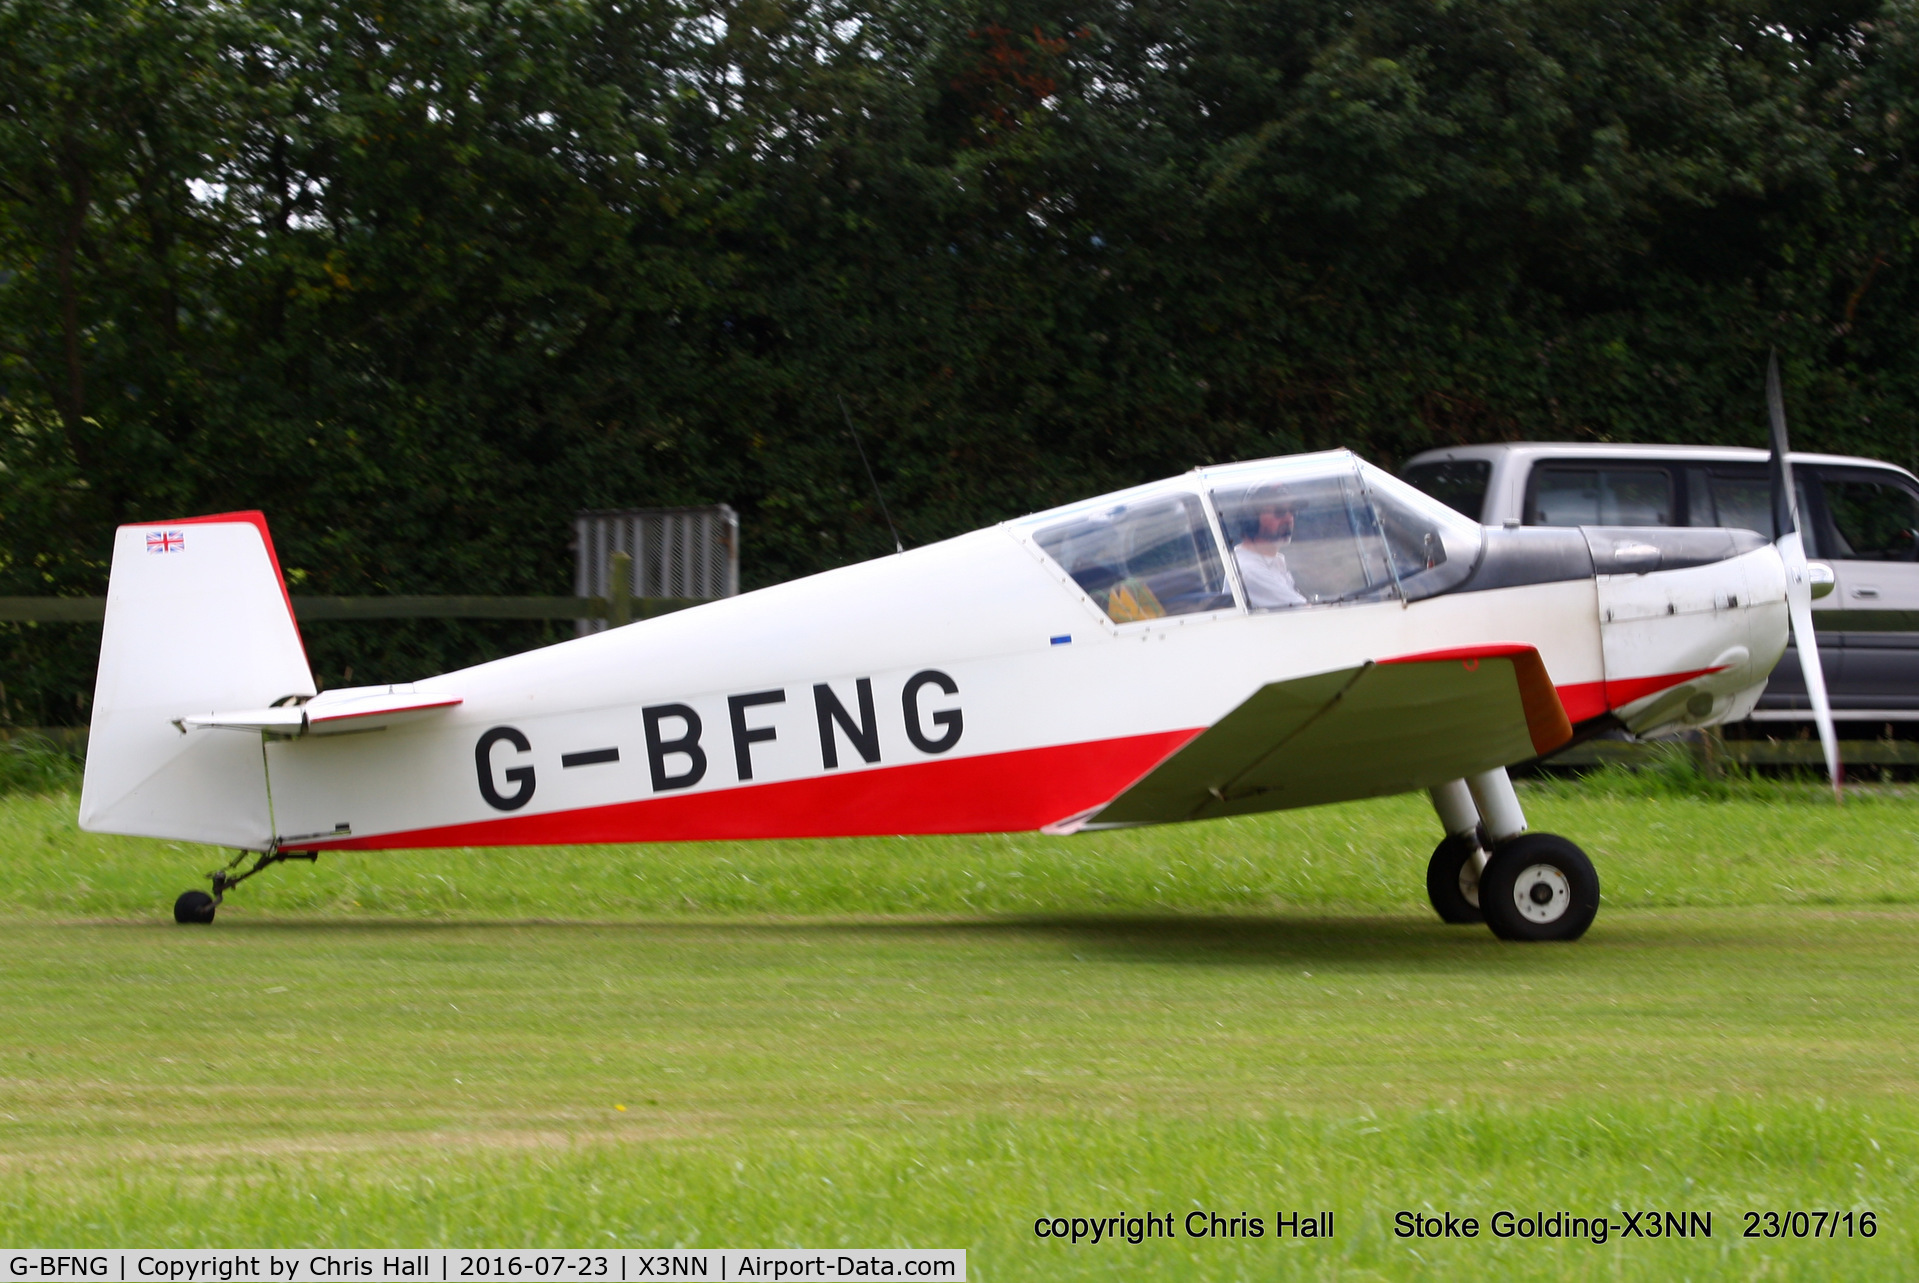 G-BFNG, 1966 Jodel D-112 C/N 1321, Stoke Golding Stakeout 2016